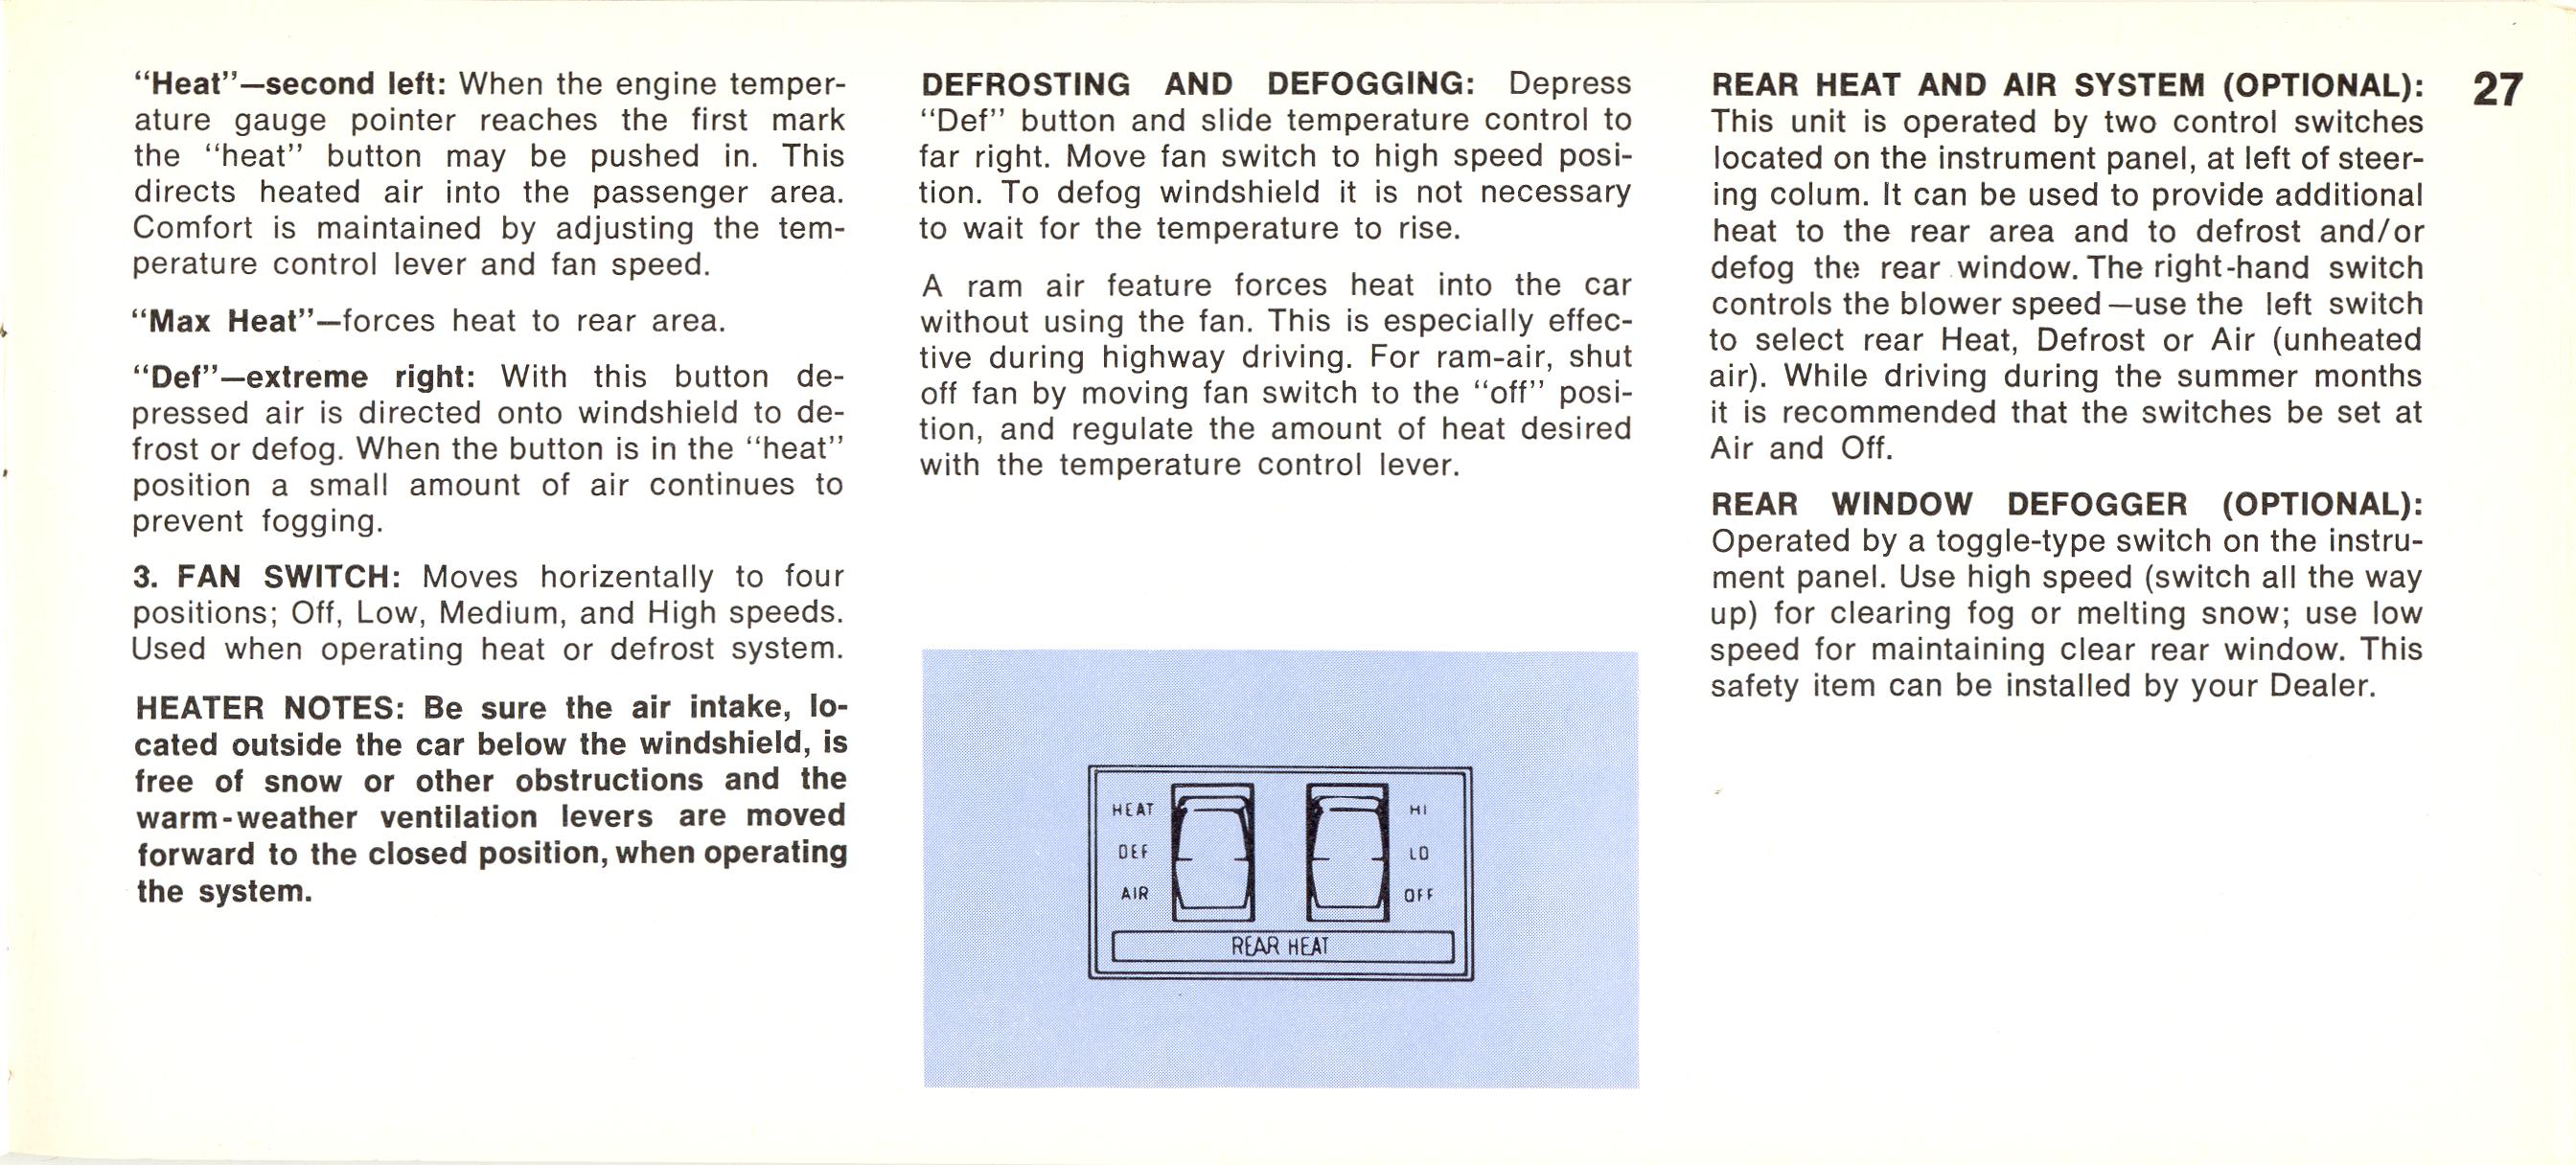 1968 Chrysler Imperial Owners Manual Page 6